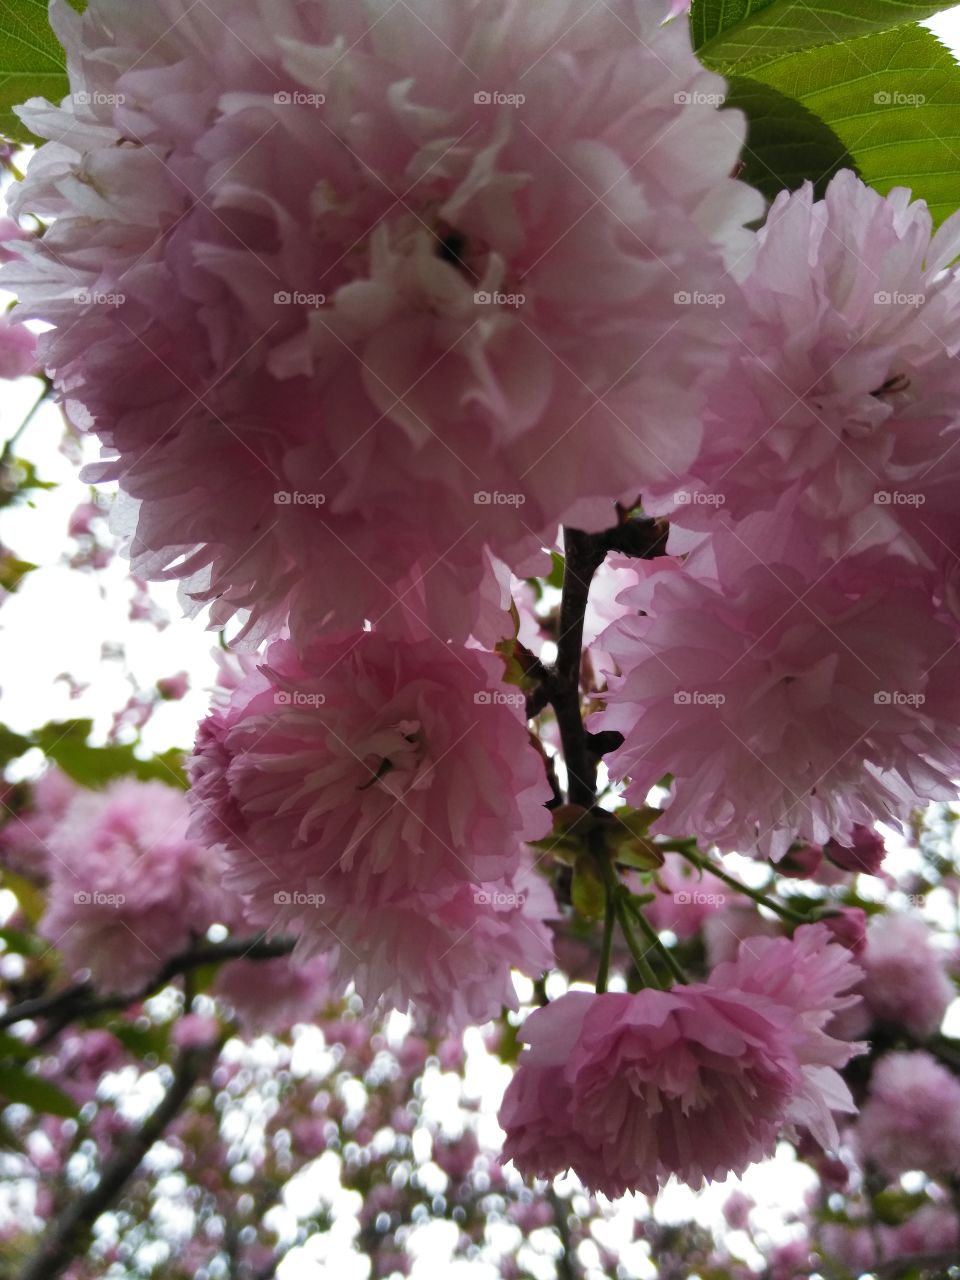 Fresh pom pom like pink flowers on a large tree, blowing overhead with an upcoming thunderstorm brewing.